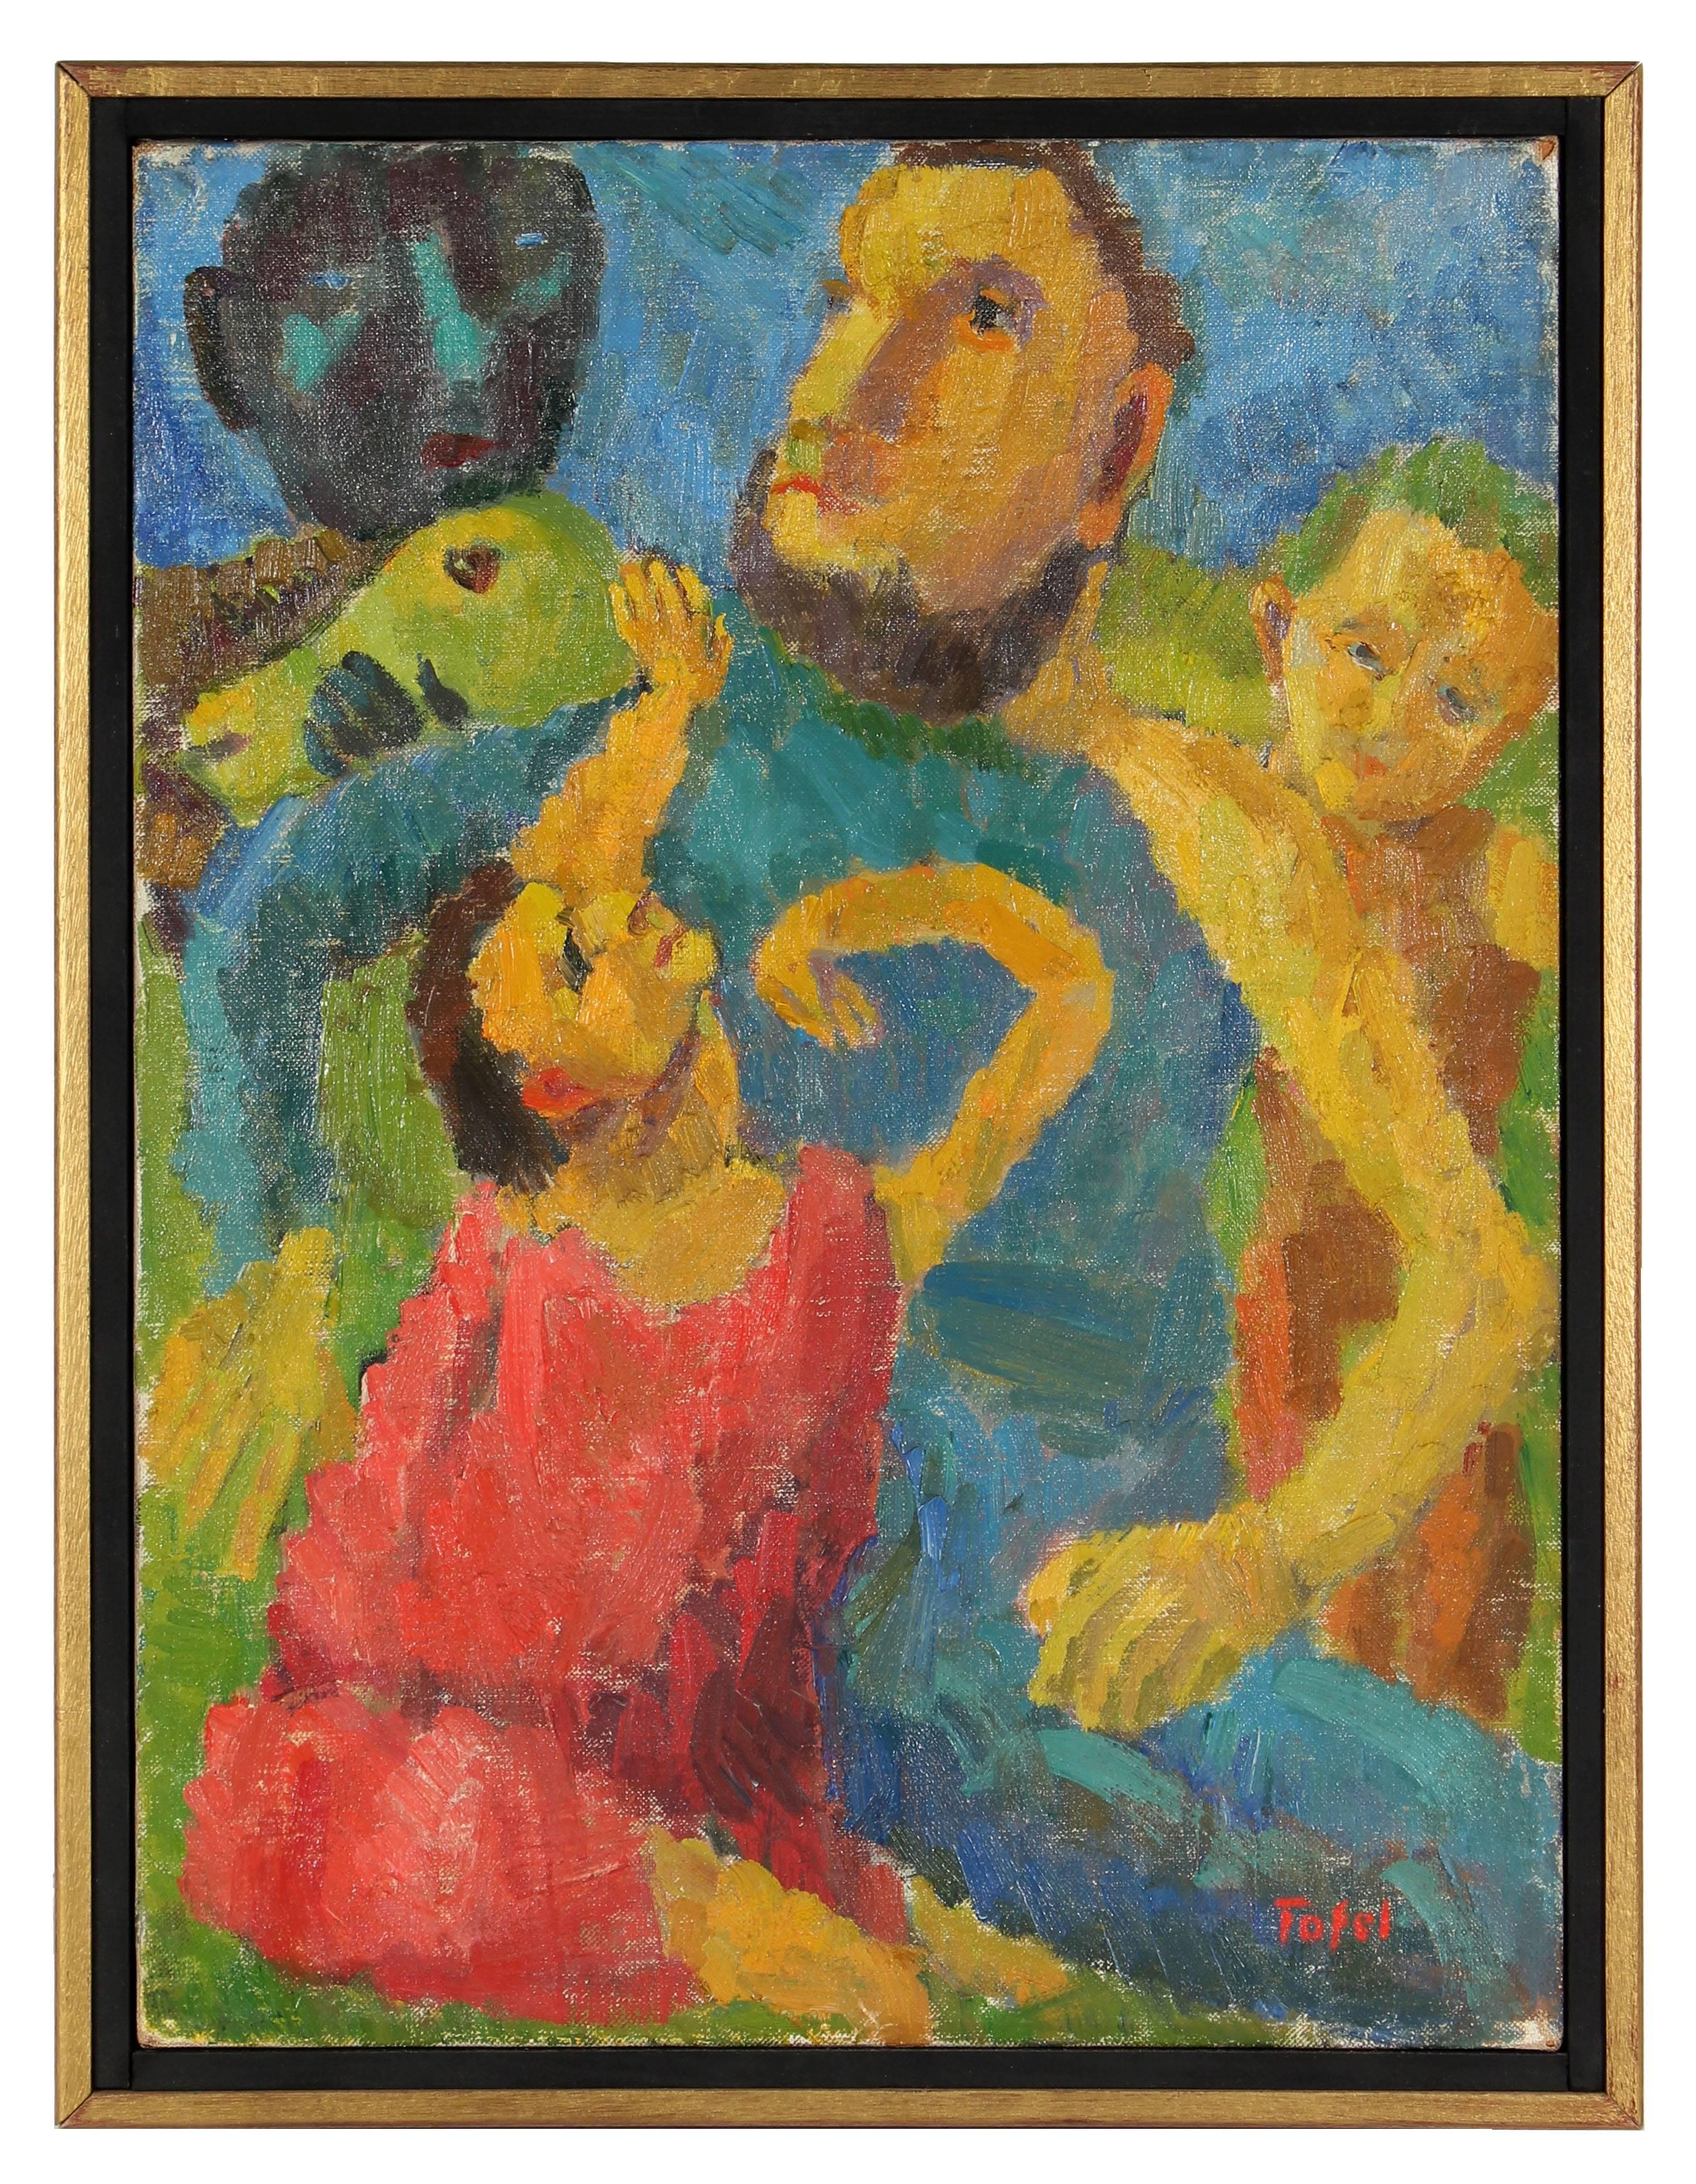 Jennings Tofel Portrait Painting - "Sacrifice of Isaac" Expressionist Oil Painting, 1955